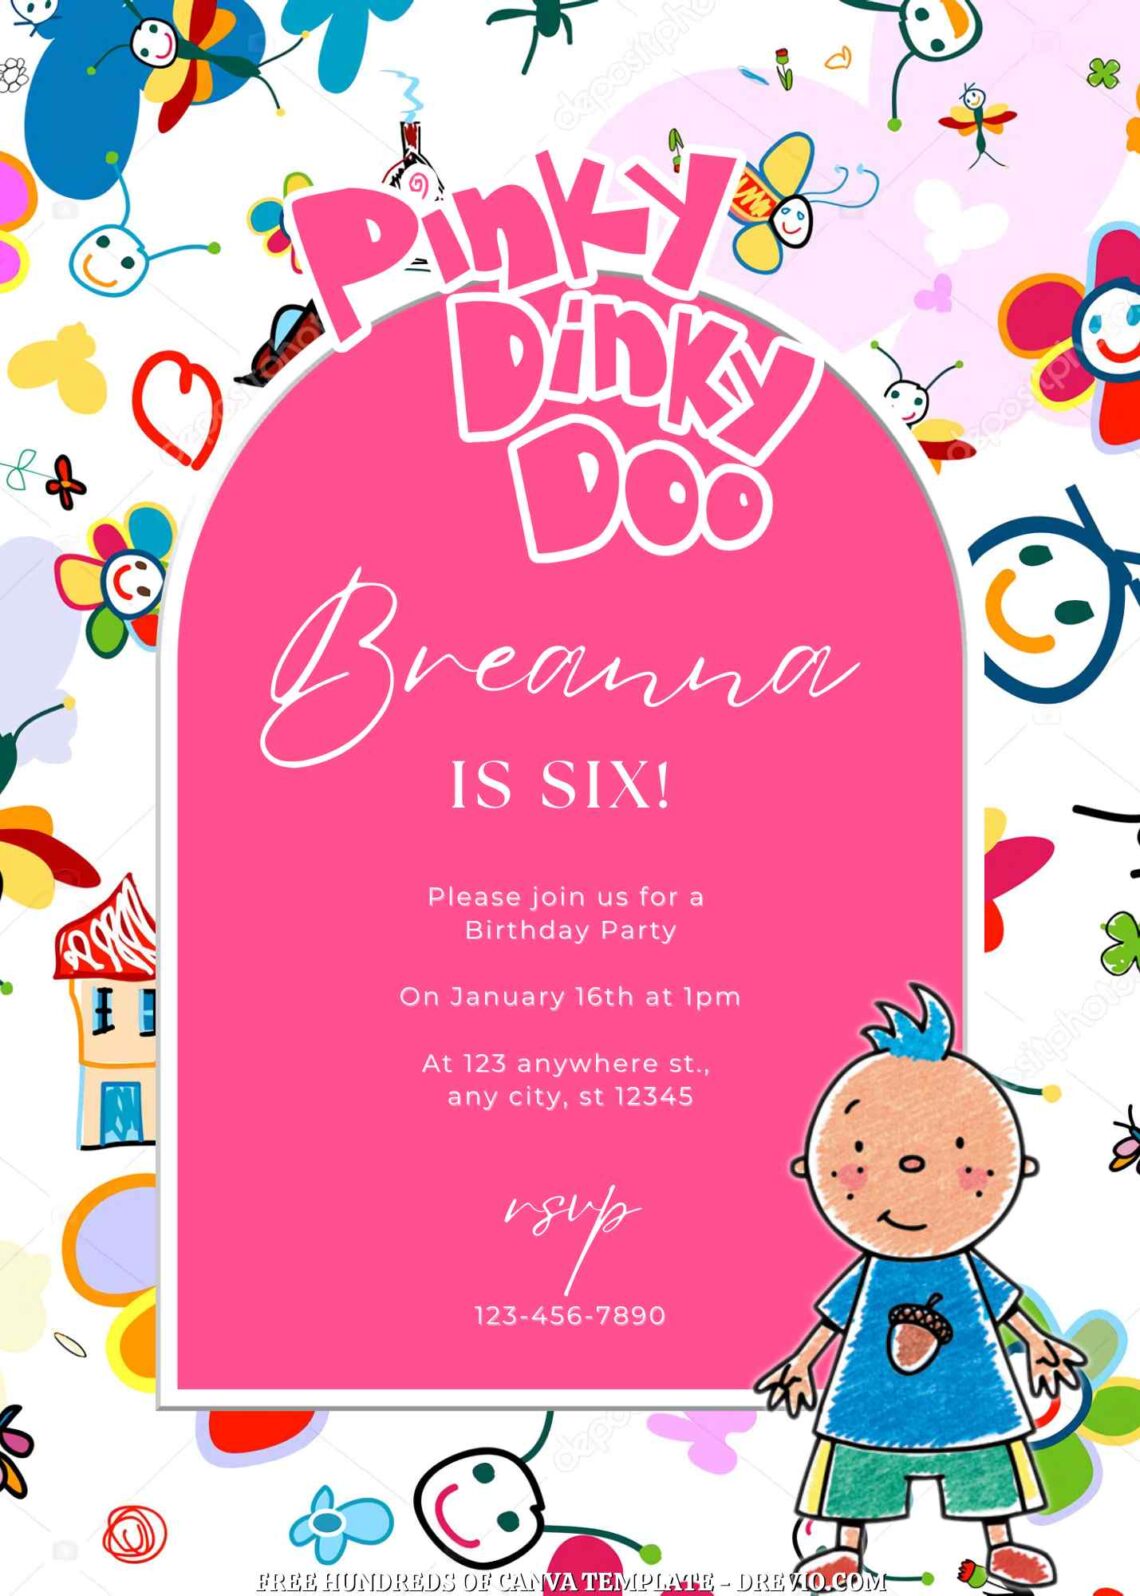 Free Customize Pinky Dinky Doo Birthday Invitations with Group in the Background